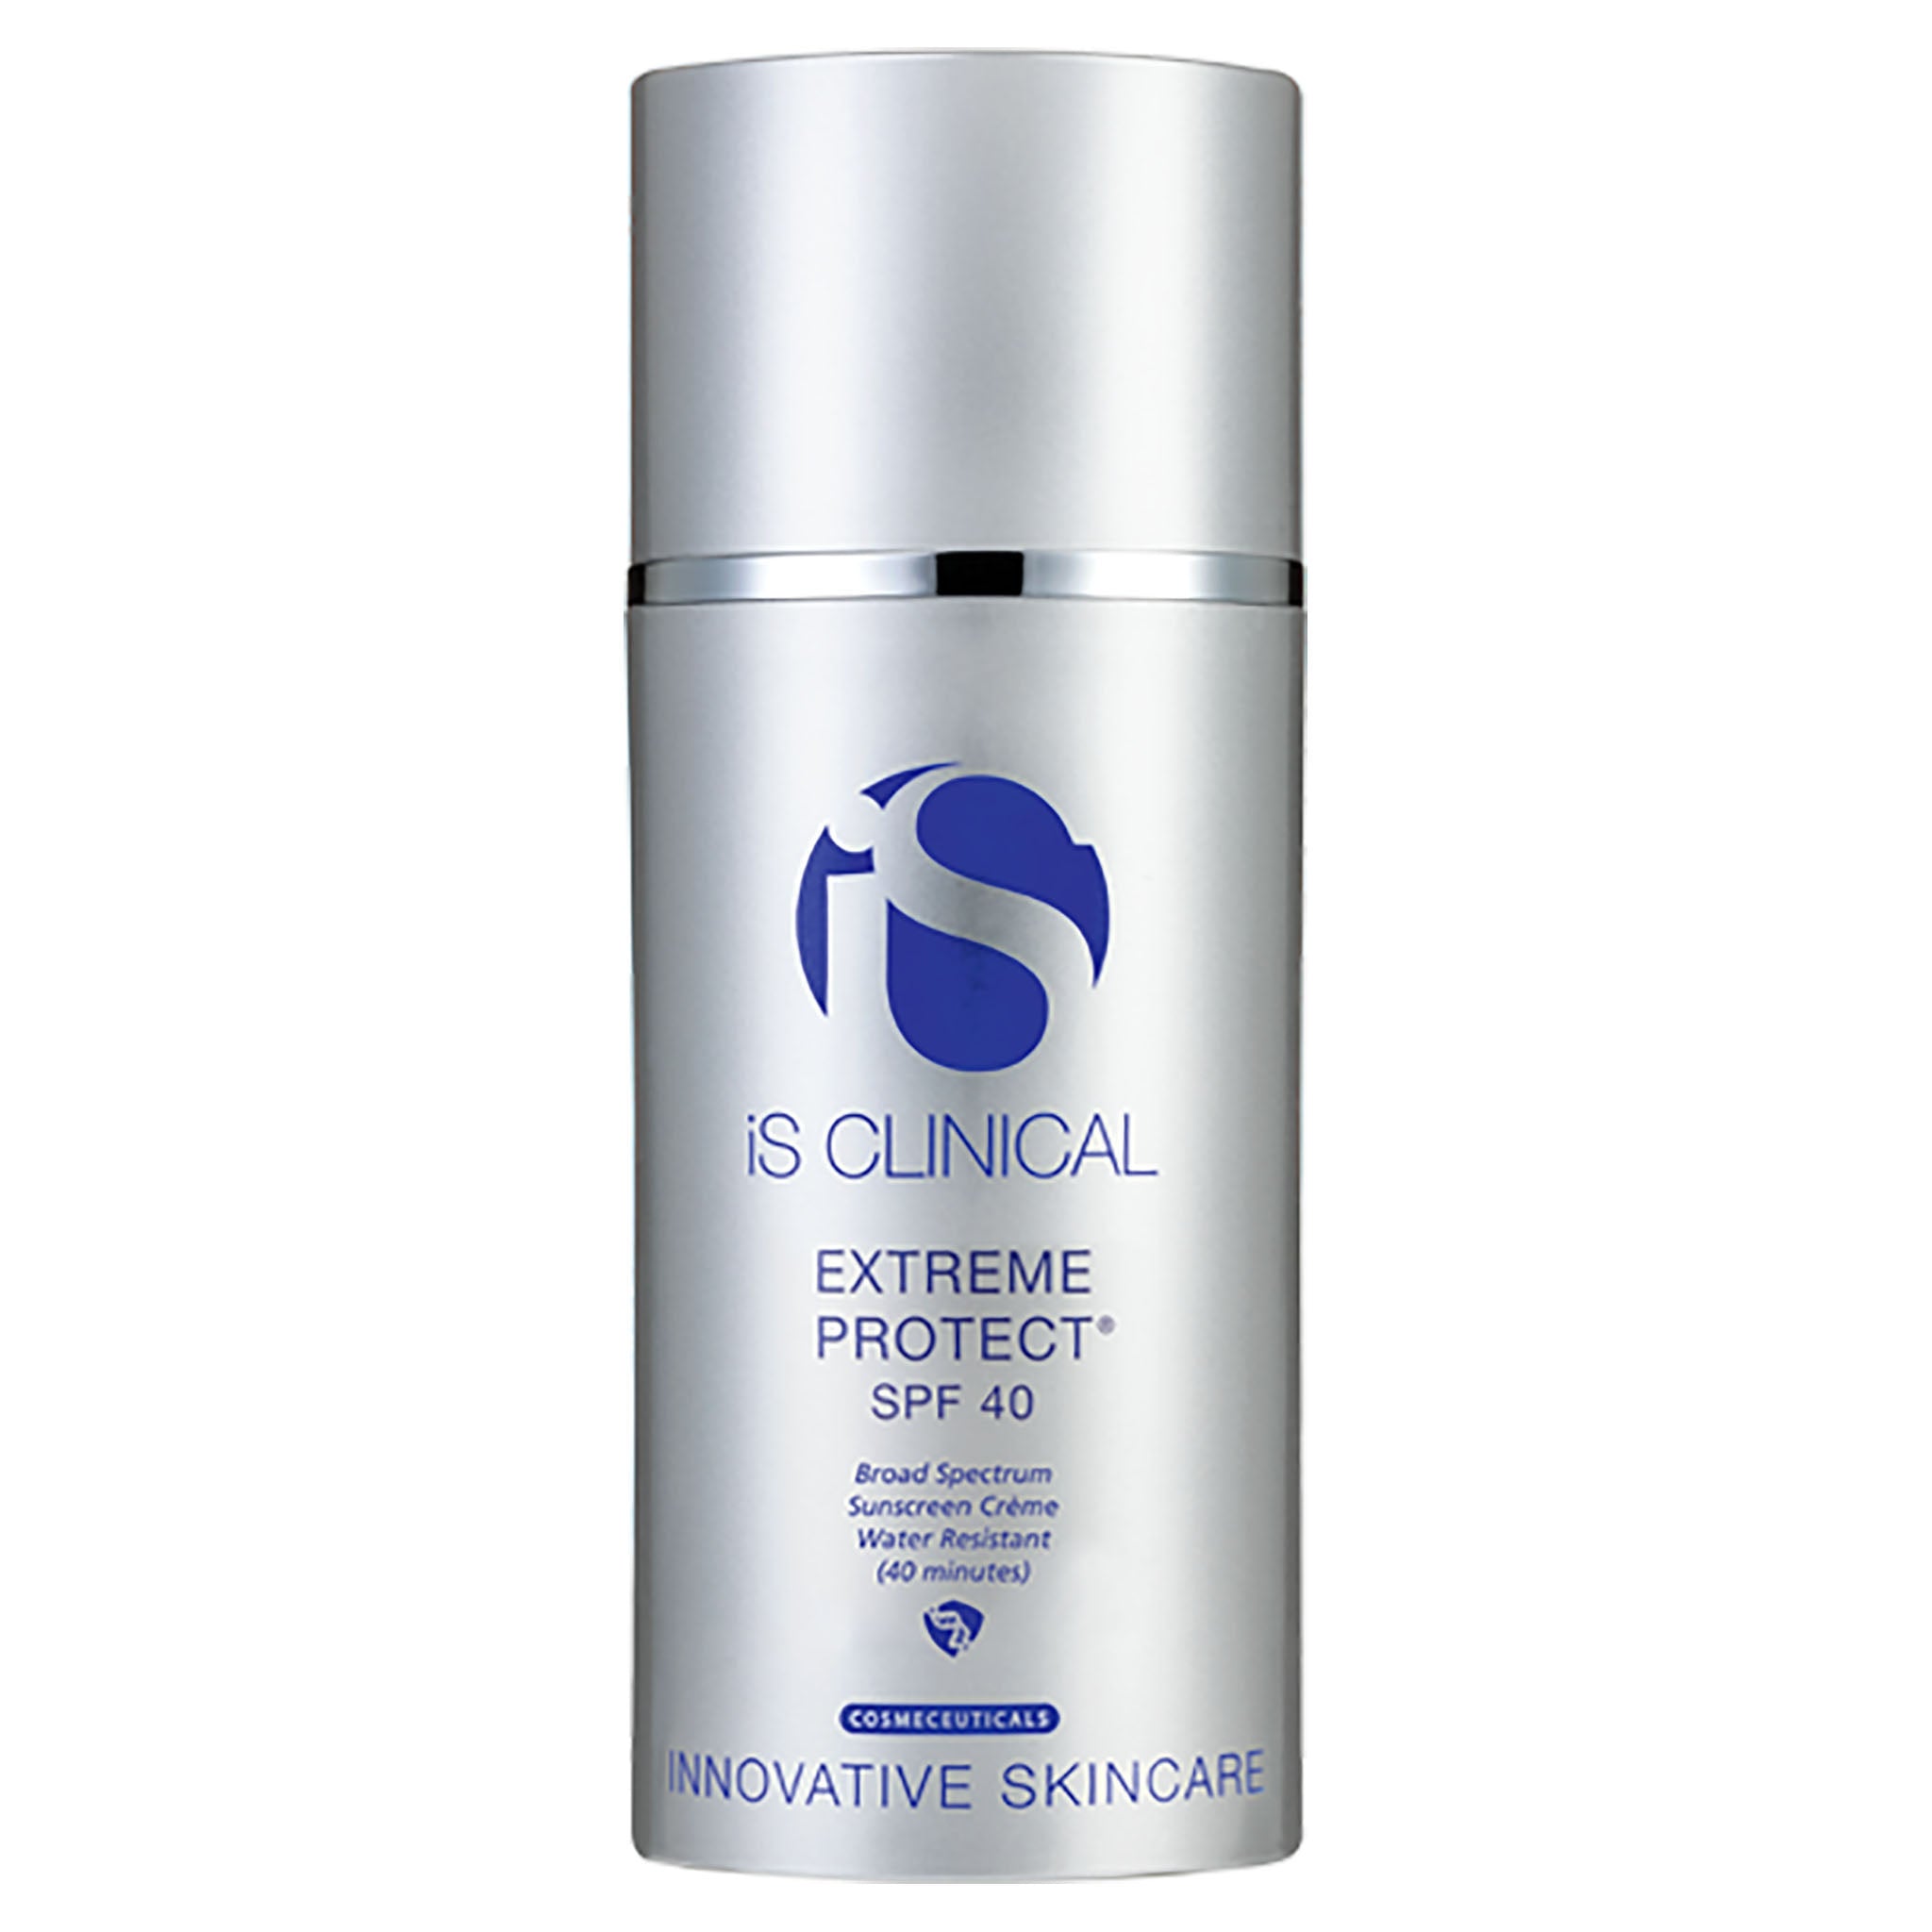 Extreme Protect Treatment SPF 30 100g – iS Clinical